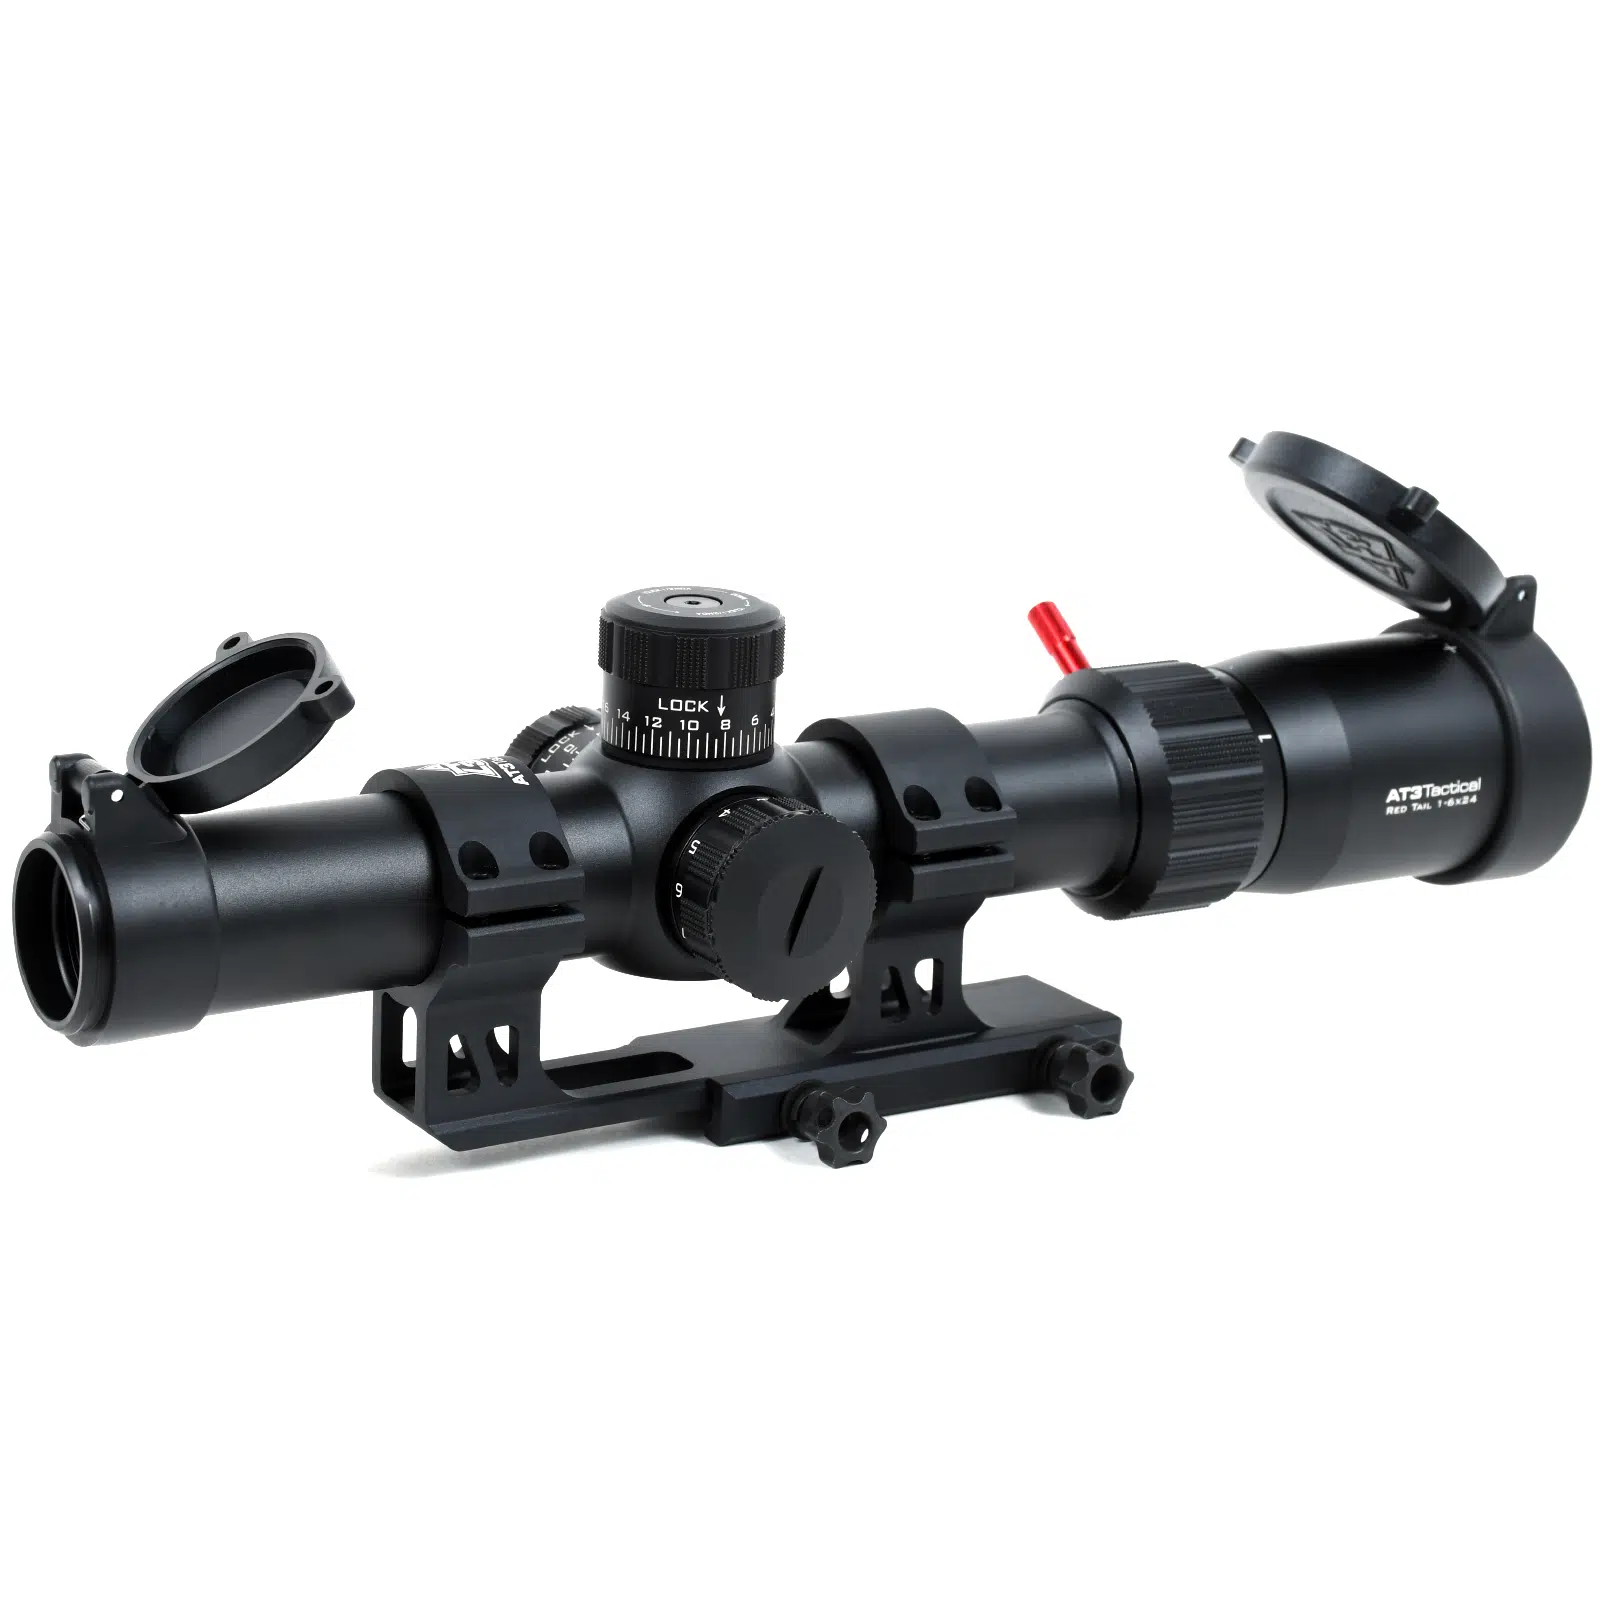 AT3™ Red Tail™ Rifle Scope with Locking Caps - 1-4x or 1-6x Magnification - 5.56 Illuminated BDC Reticle